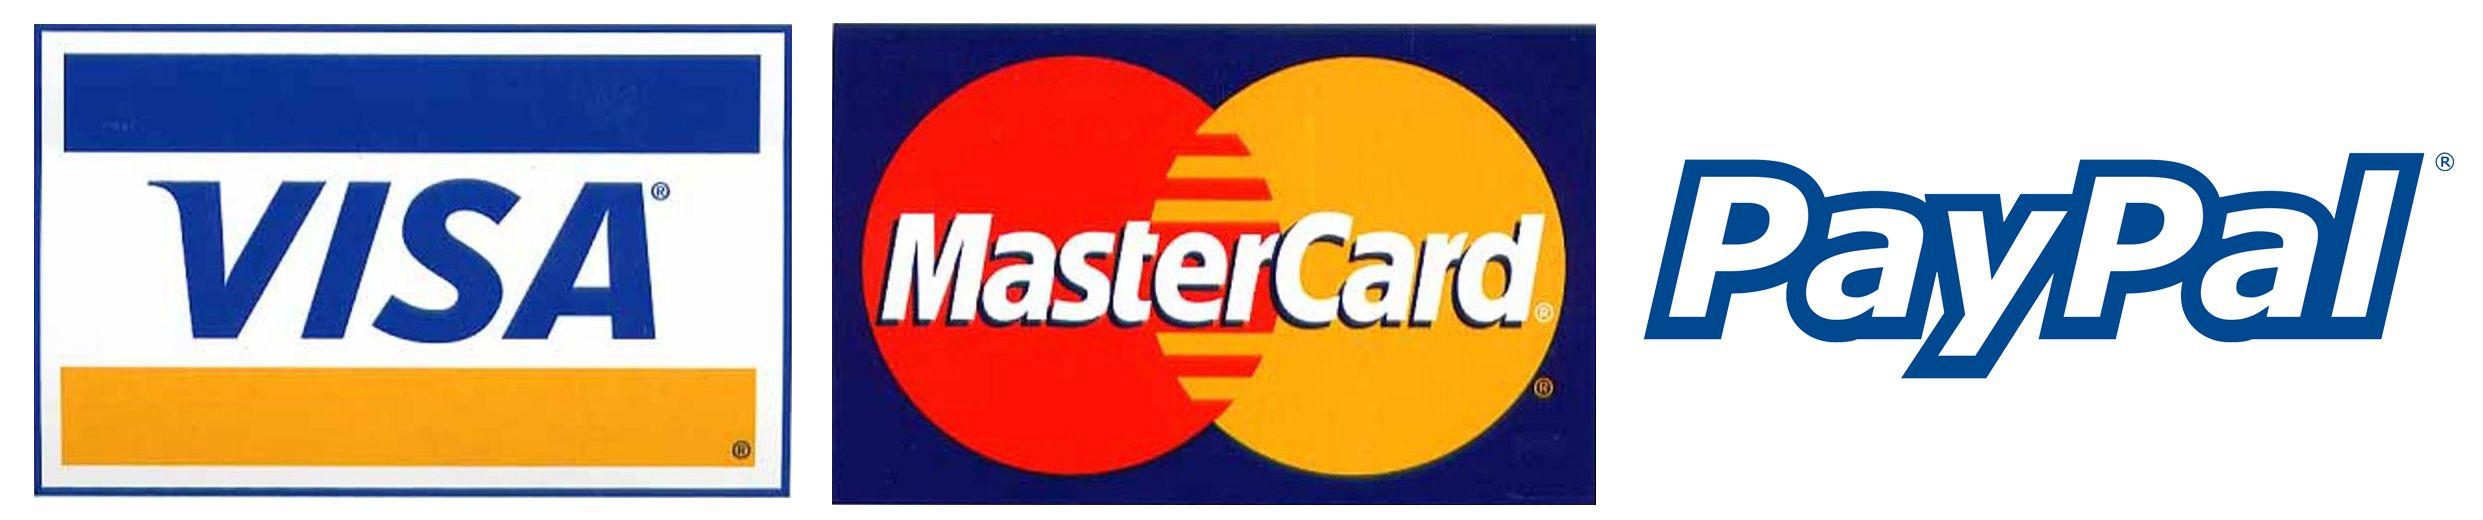 PayPal Verified Visa MasterCard Logo - Secure Payment and Privacy Policy - Nuastyle